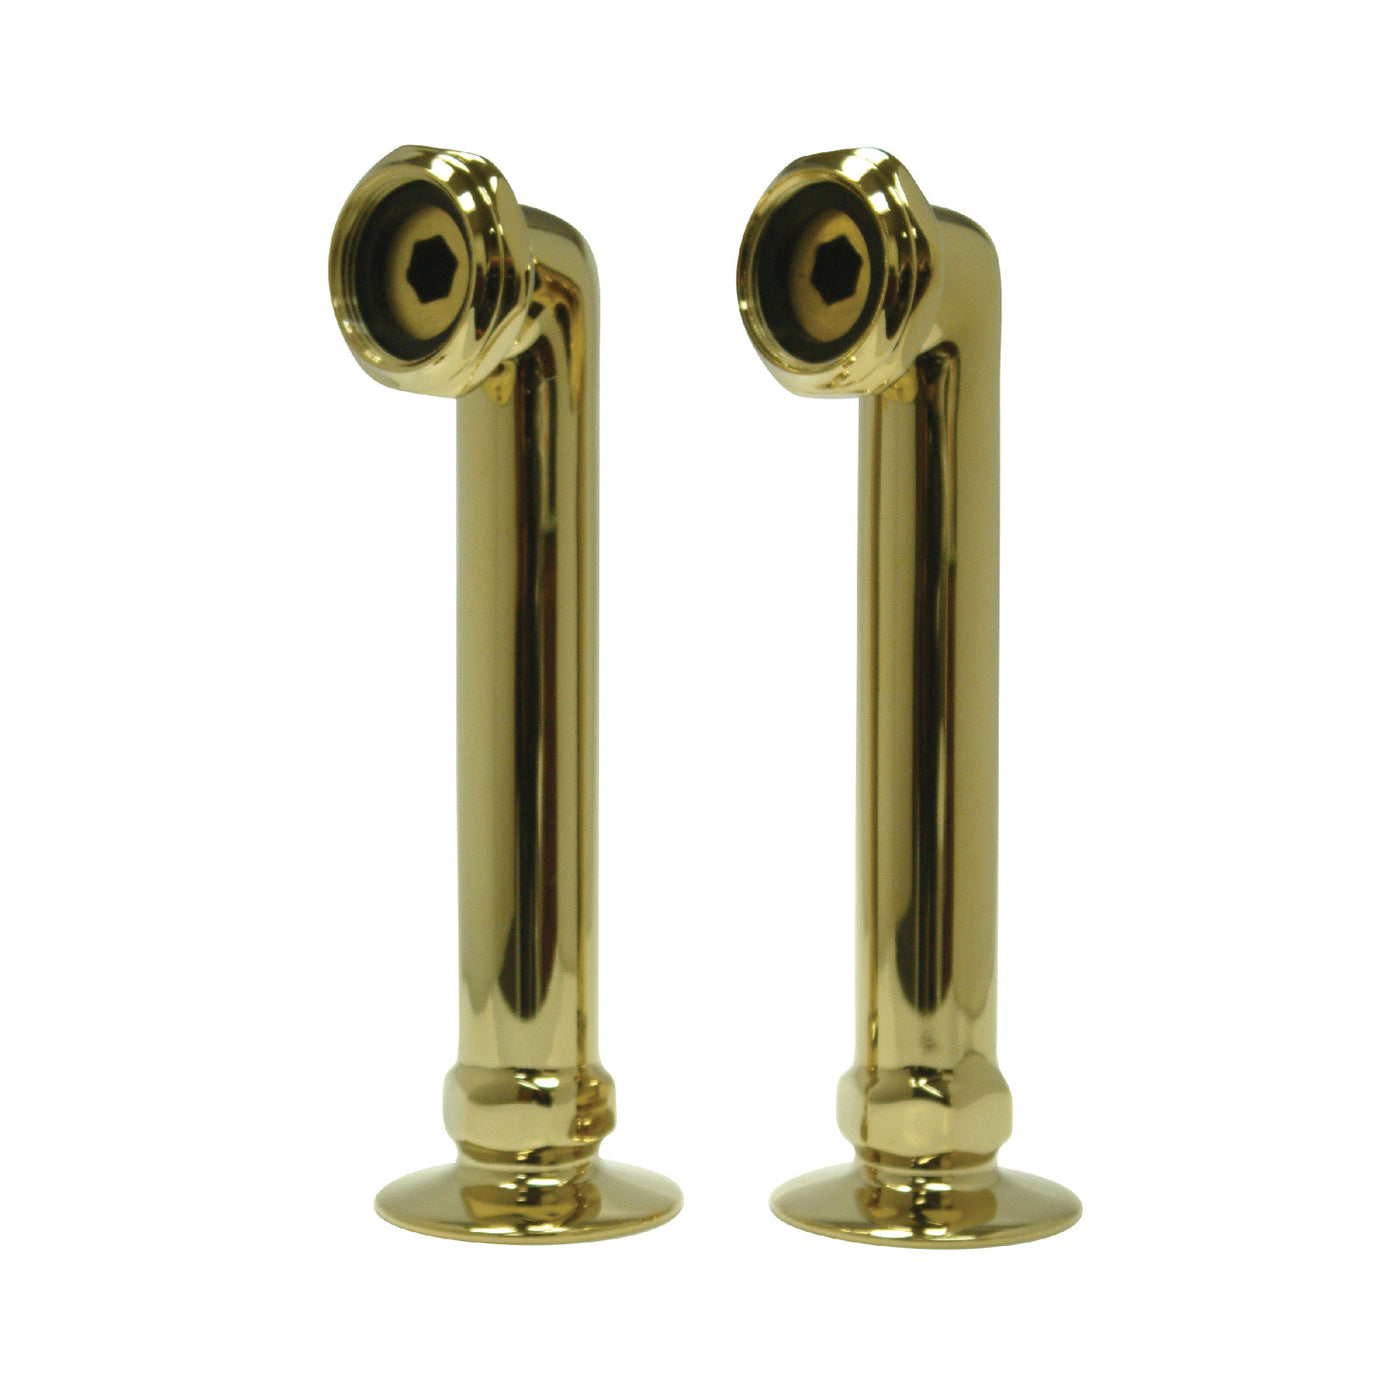 Elements of Design DS6RS2 6-Inch Deck Mount Tub Faucet Riser, Polished Brass